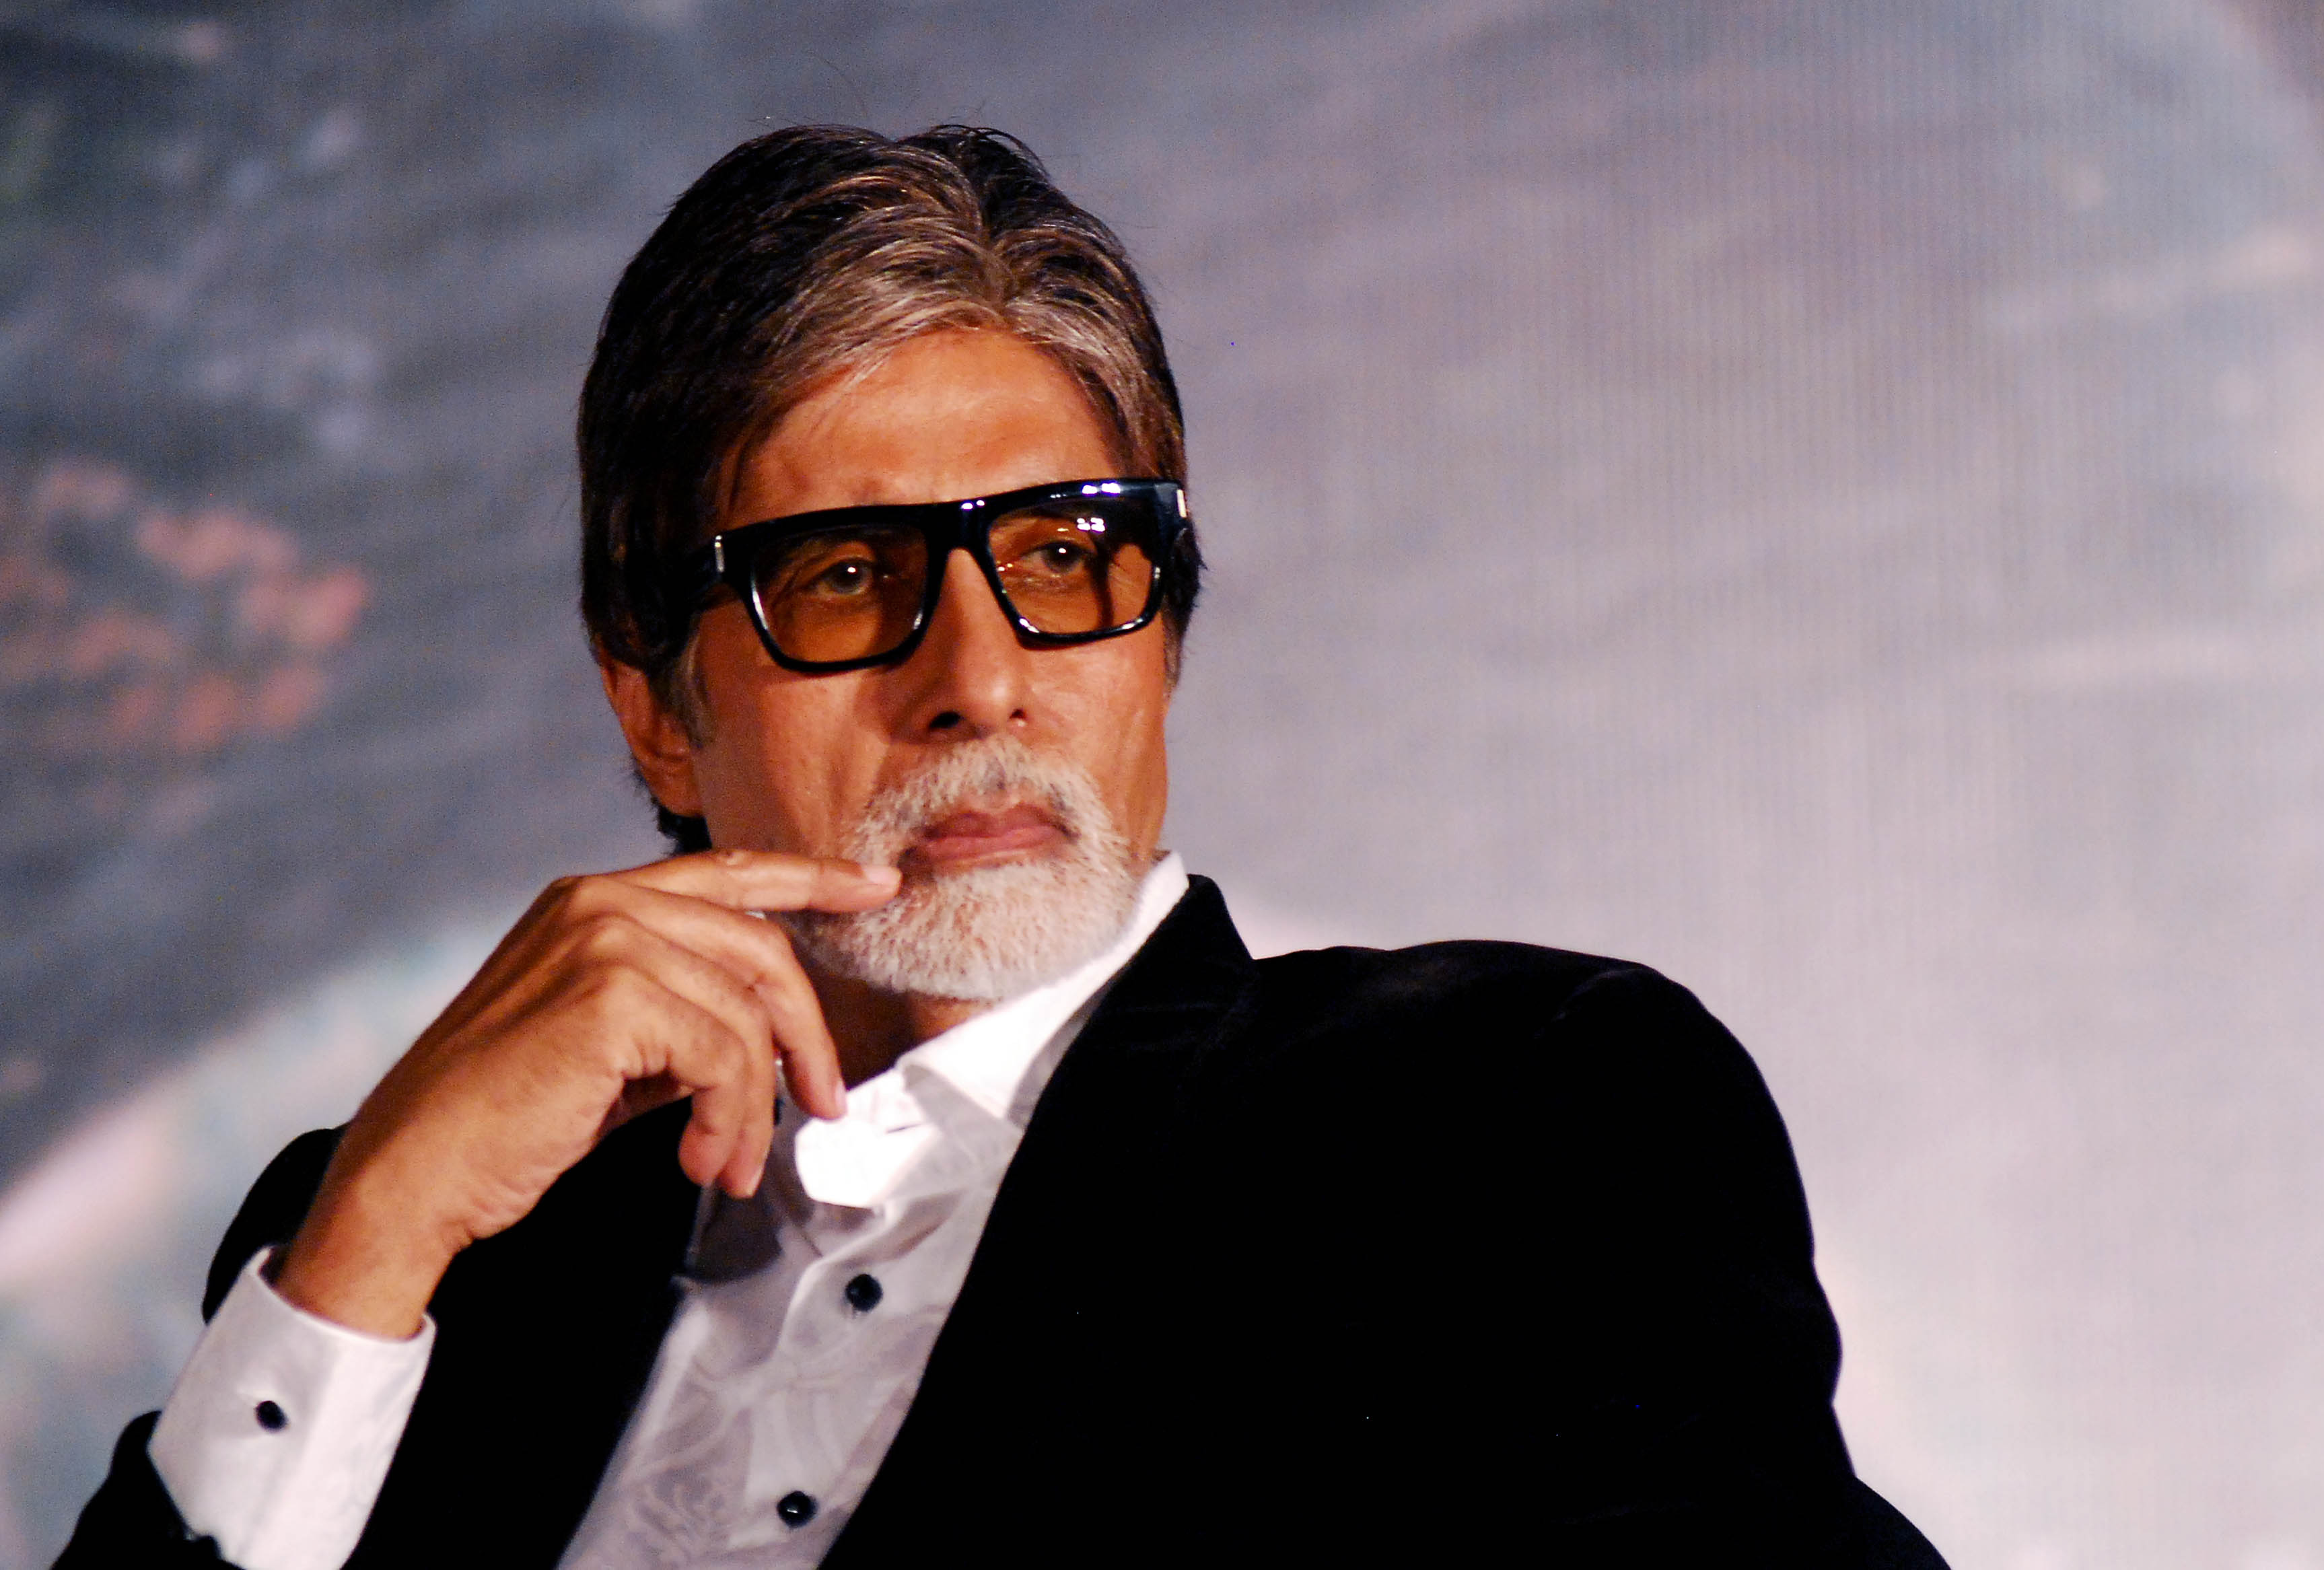 Amitabh Bachchan likes to be 'ignorant' about politics, society